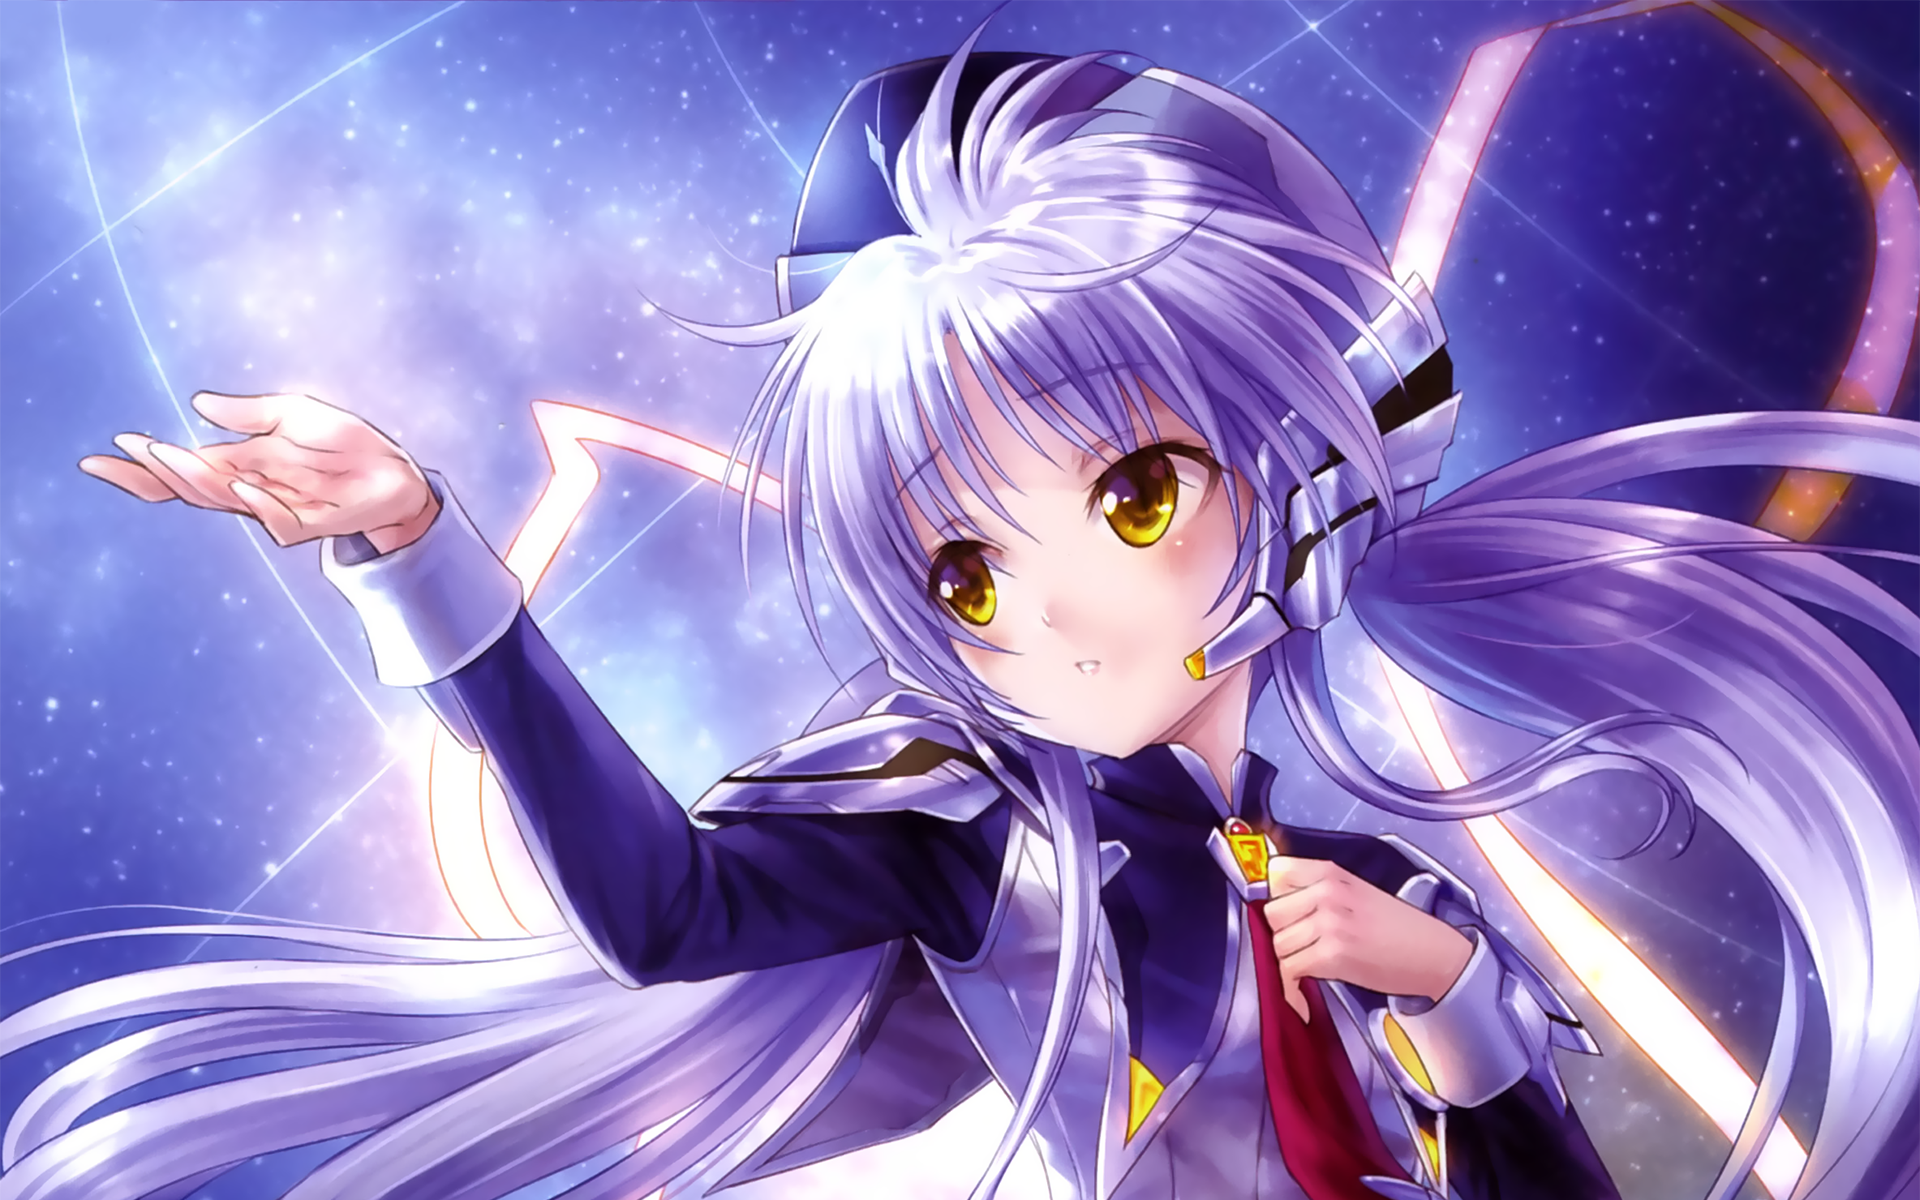 Anime Planetarian: The Reverie of a Little Planet HD Wallpaper by Goto-P